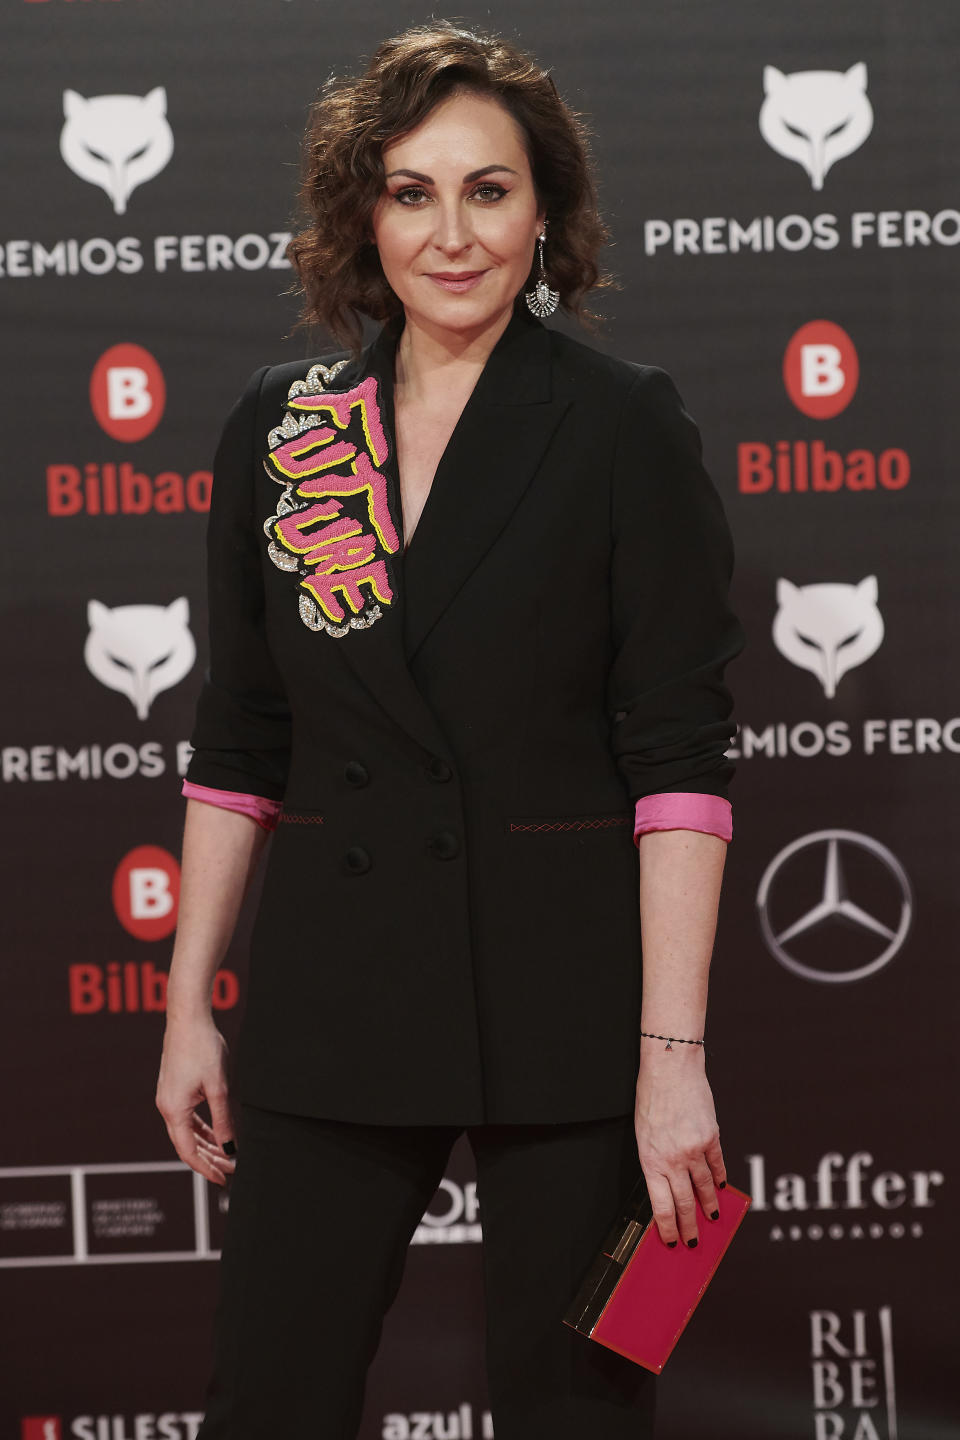 Ana Milan attends the Feroz Awards 2019 Red Carpet at Bilbao Arena in Bilbao, Spain  on Jan 19, 2019 (Photo by Gabriel Maseda/NurPhoto via Getty Images)